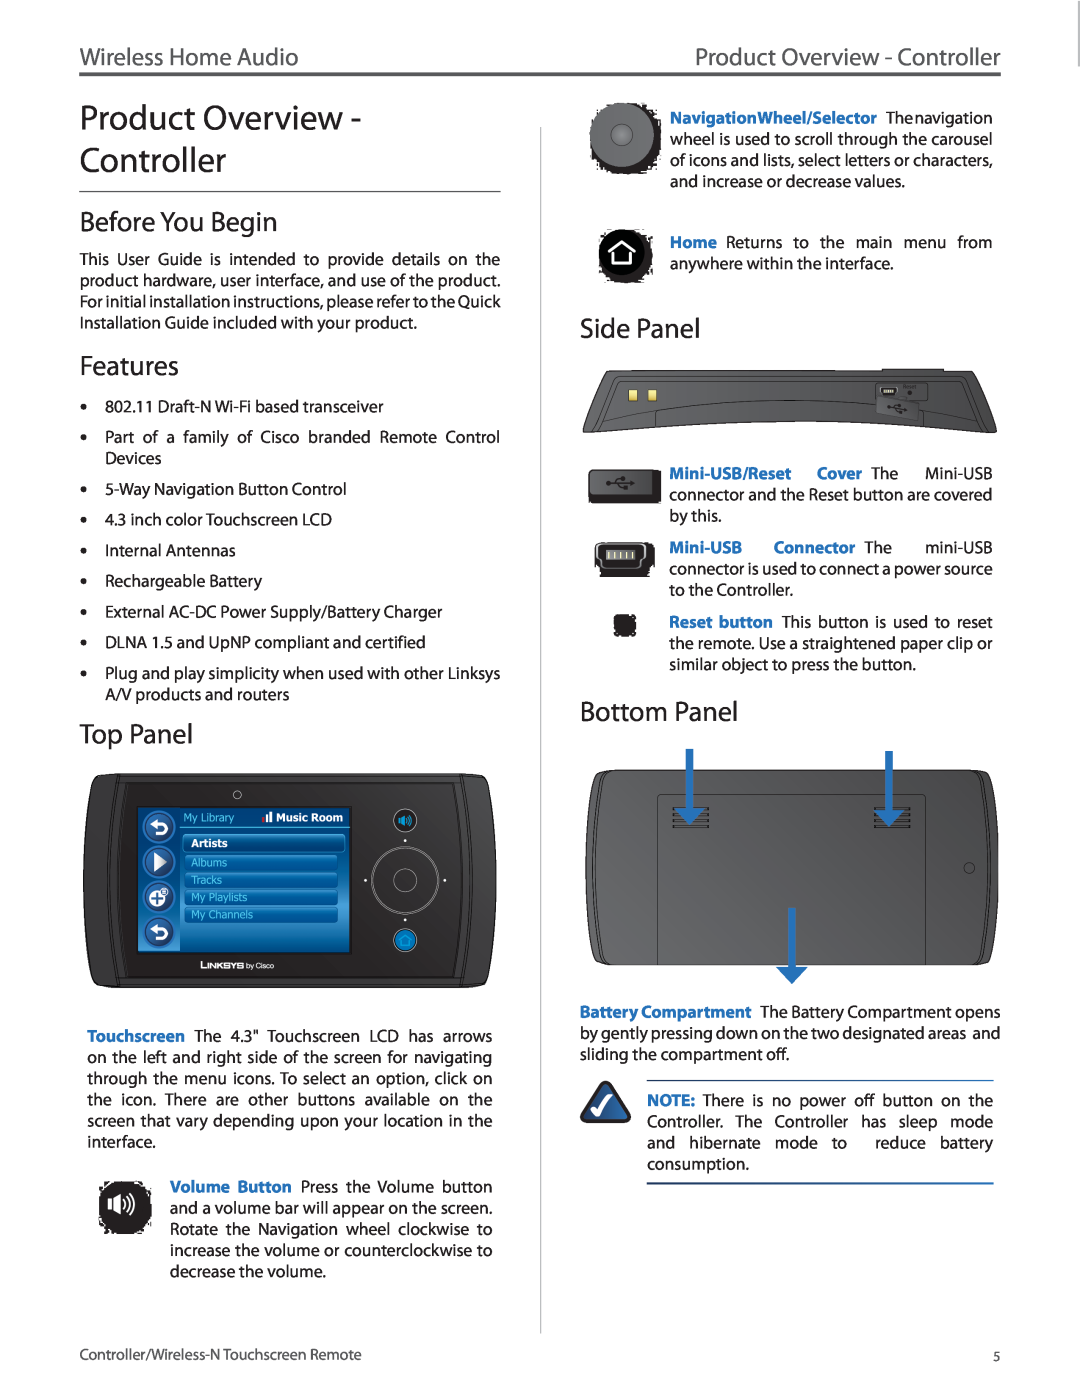 Linksys DMRW1000 manual Product Overview Controller, Before You Begin, Features, Top Panel, Side Panel, Bottom Panel 